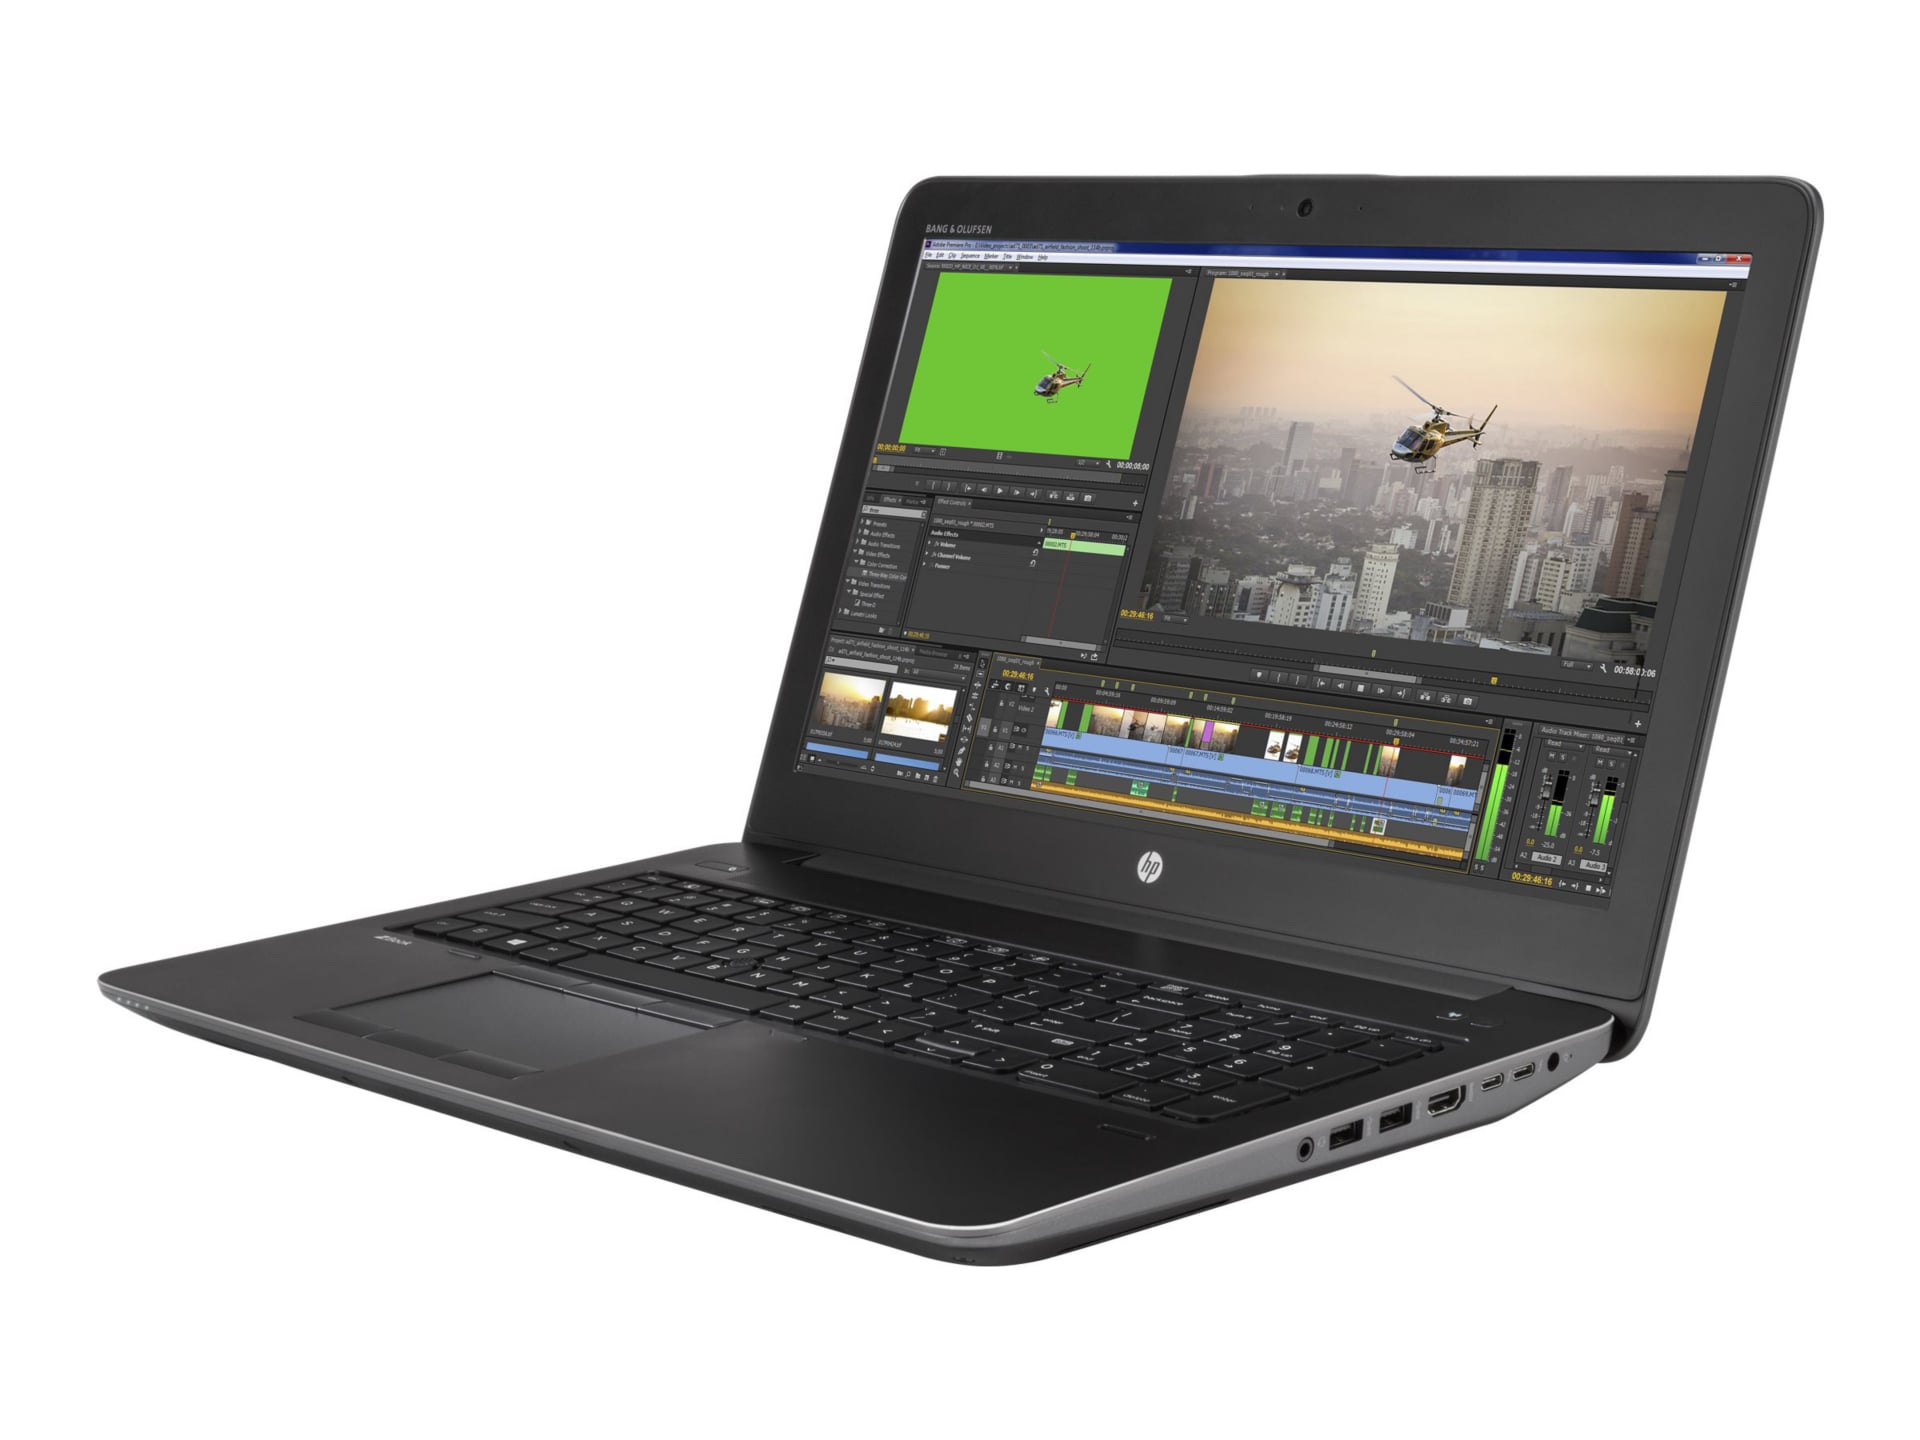 HP ZBook 15 G3 Mobile Workstation - 15.6" - Core i7 6820HQ - 32 GB RAM - 1 TB SSD + 1 TB HDD - US